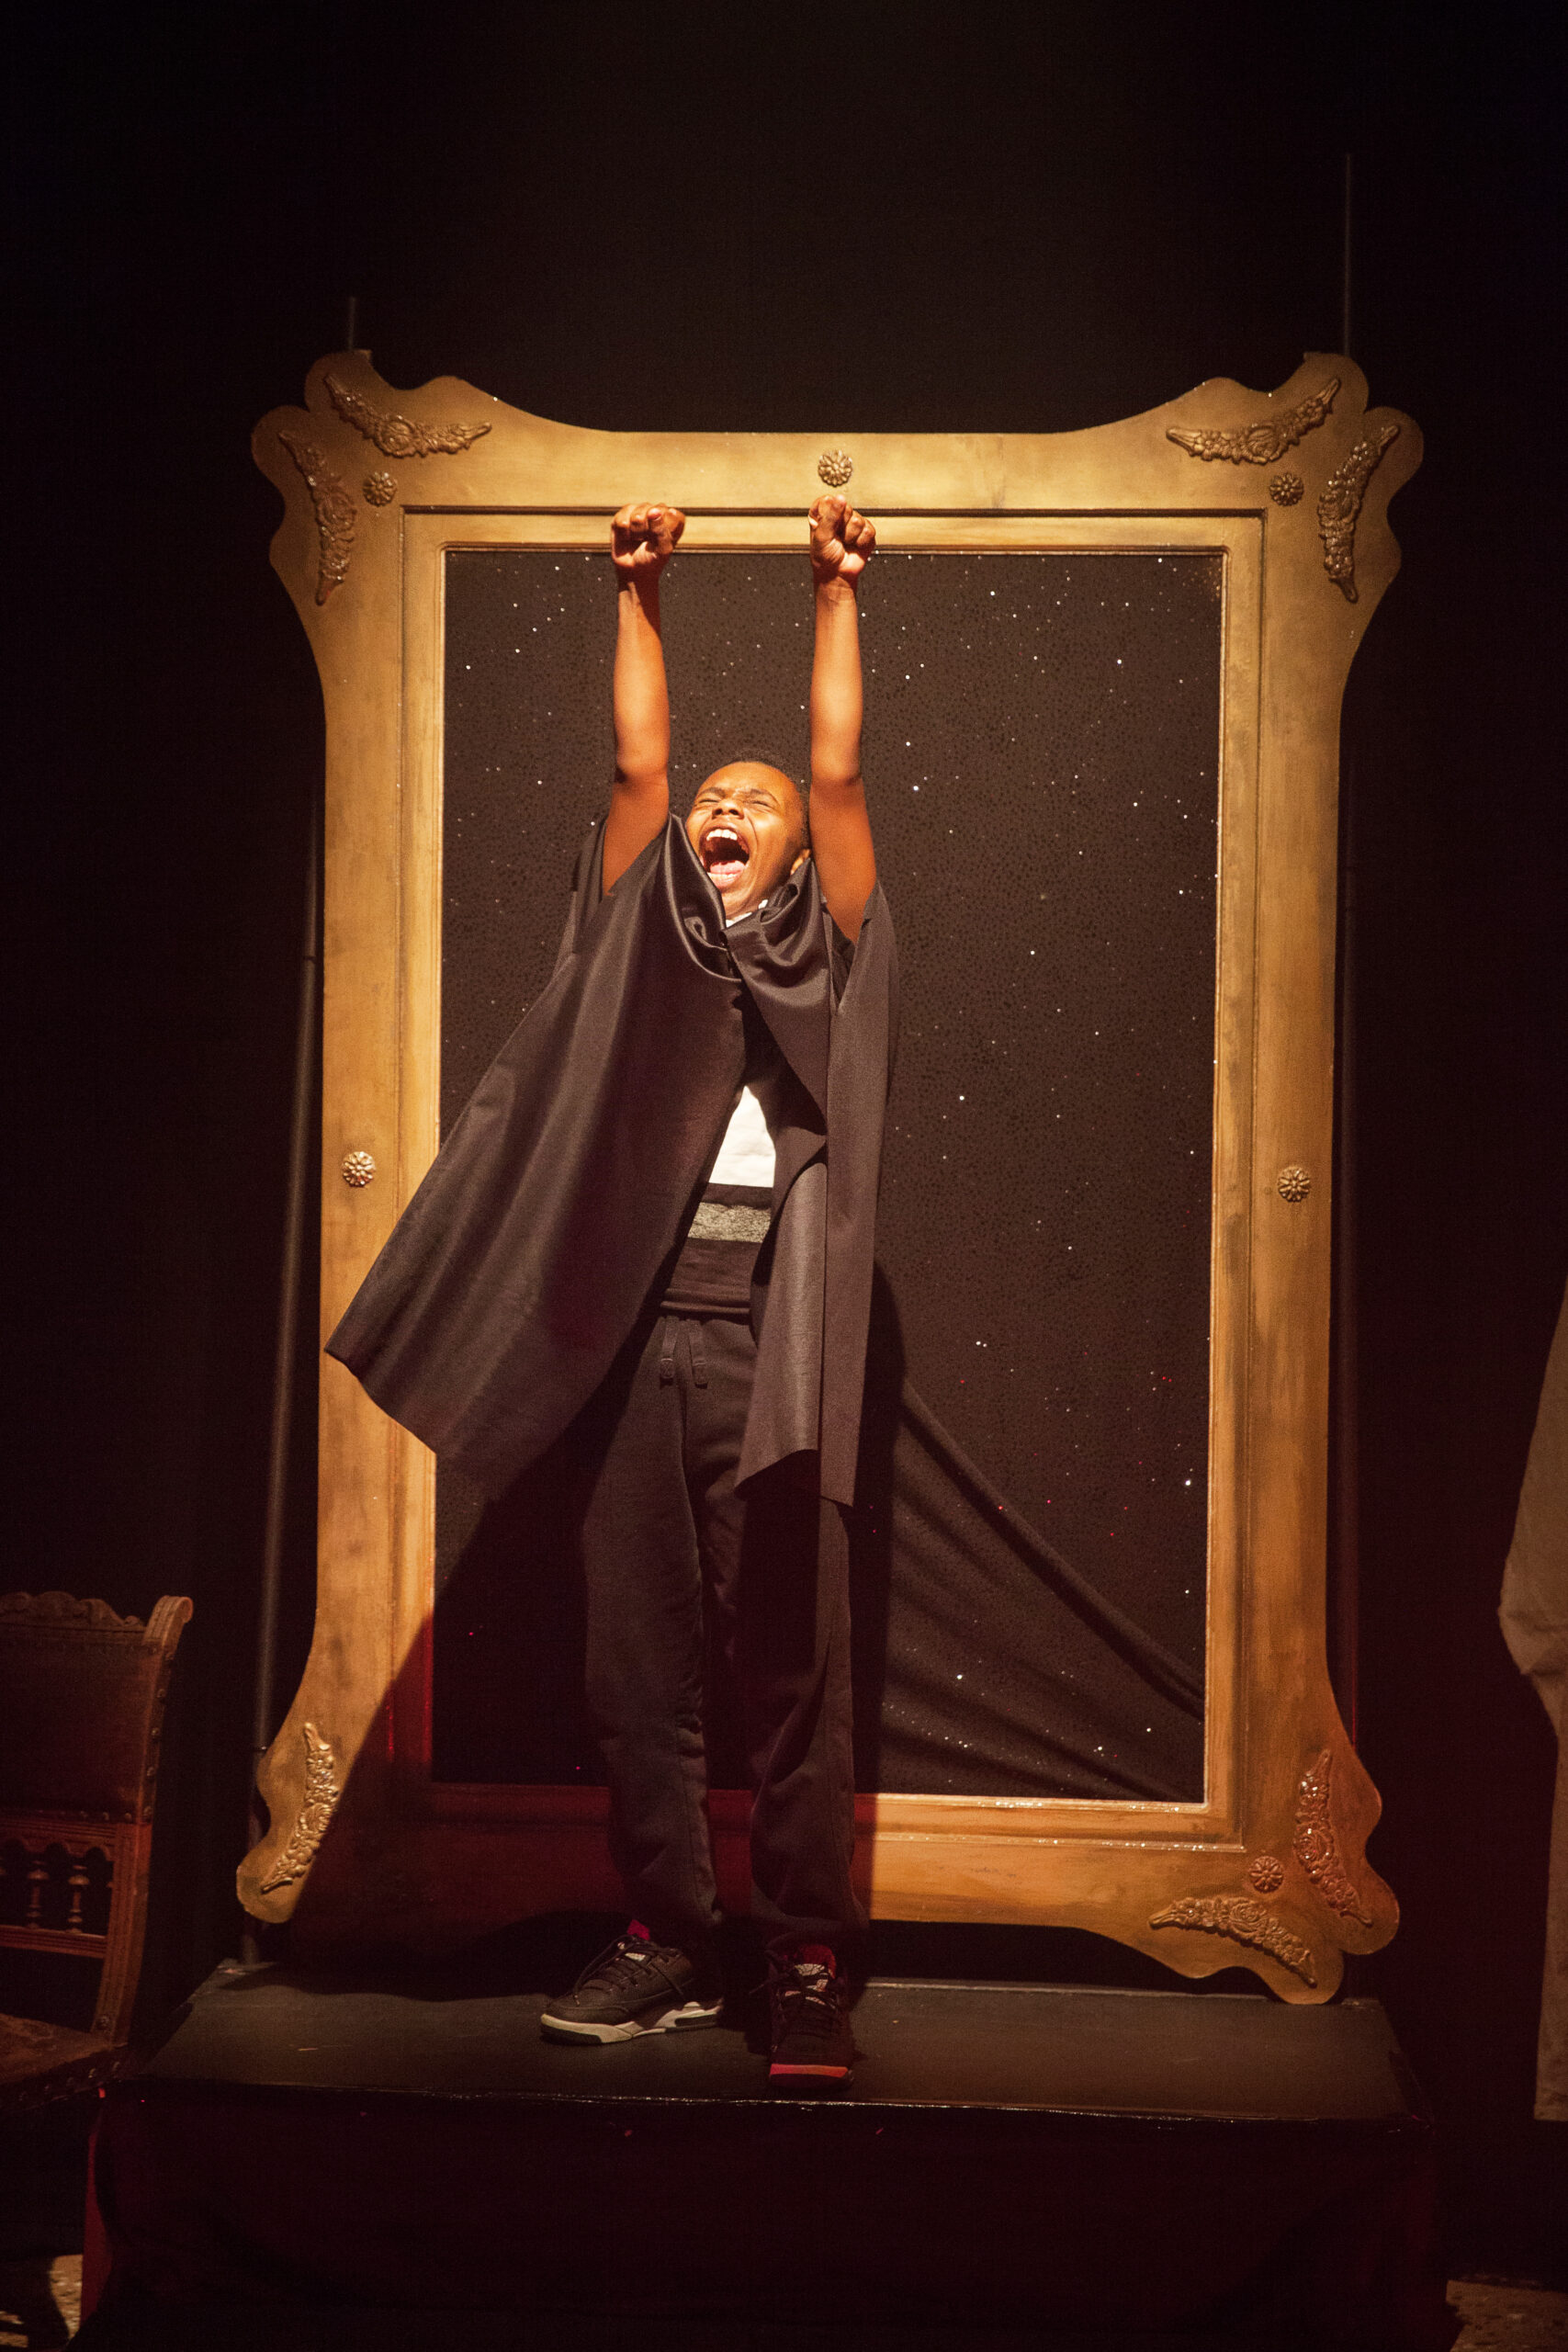 An actor reaching up to the sky in front of a large wooden frame